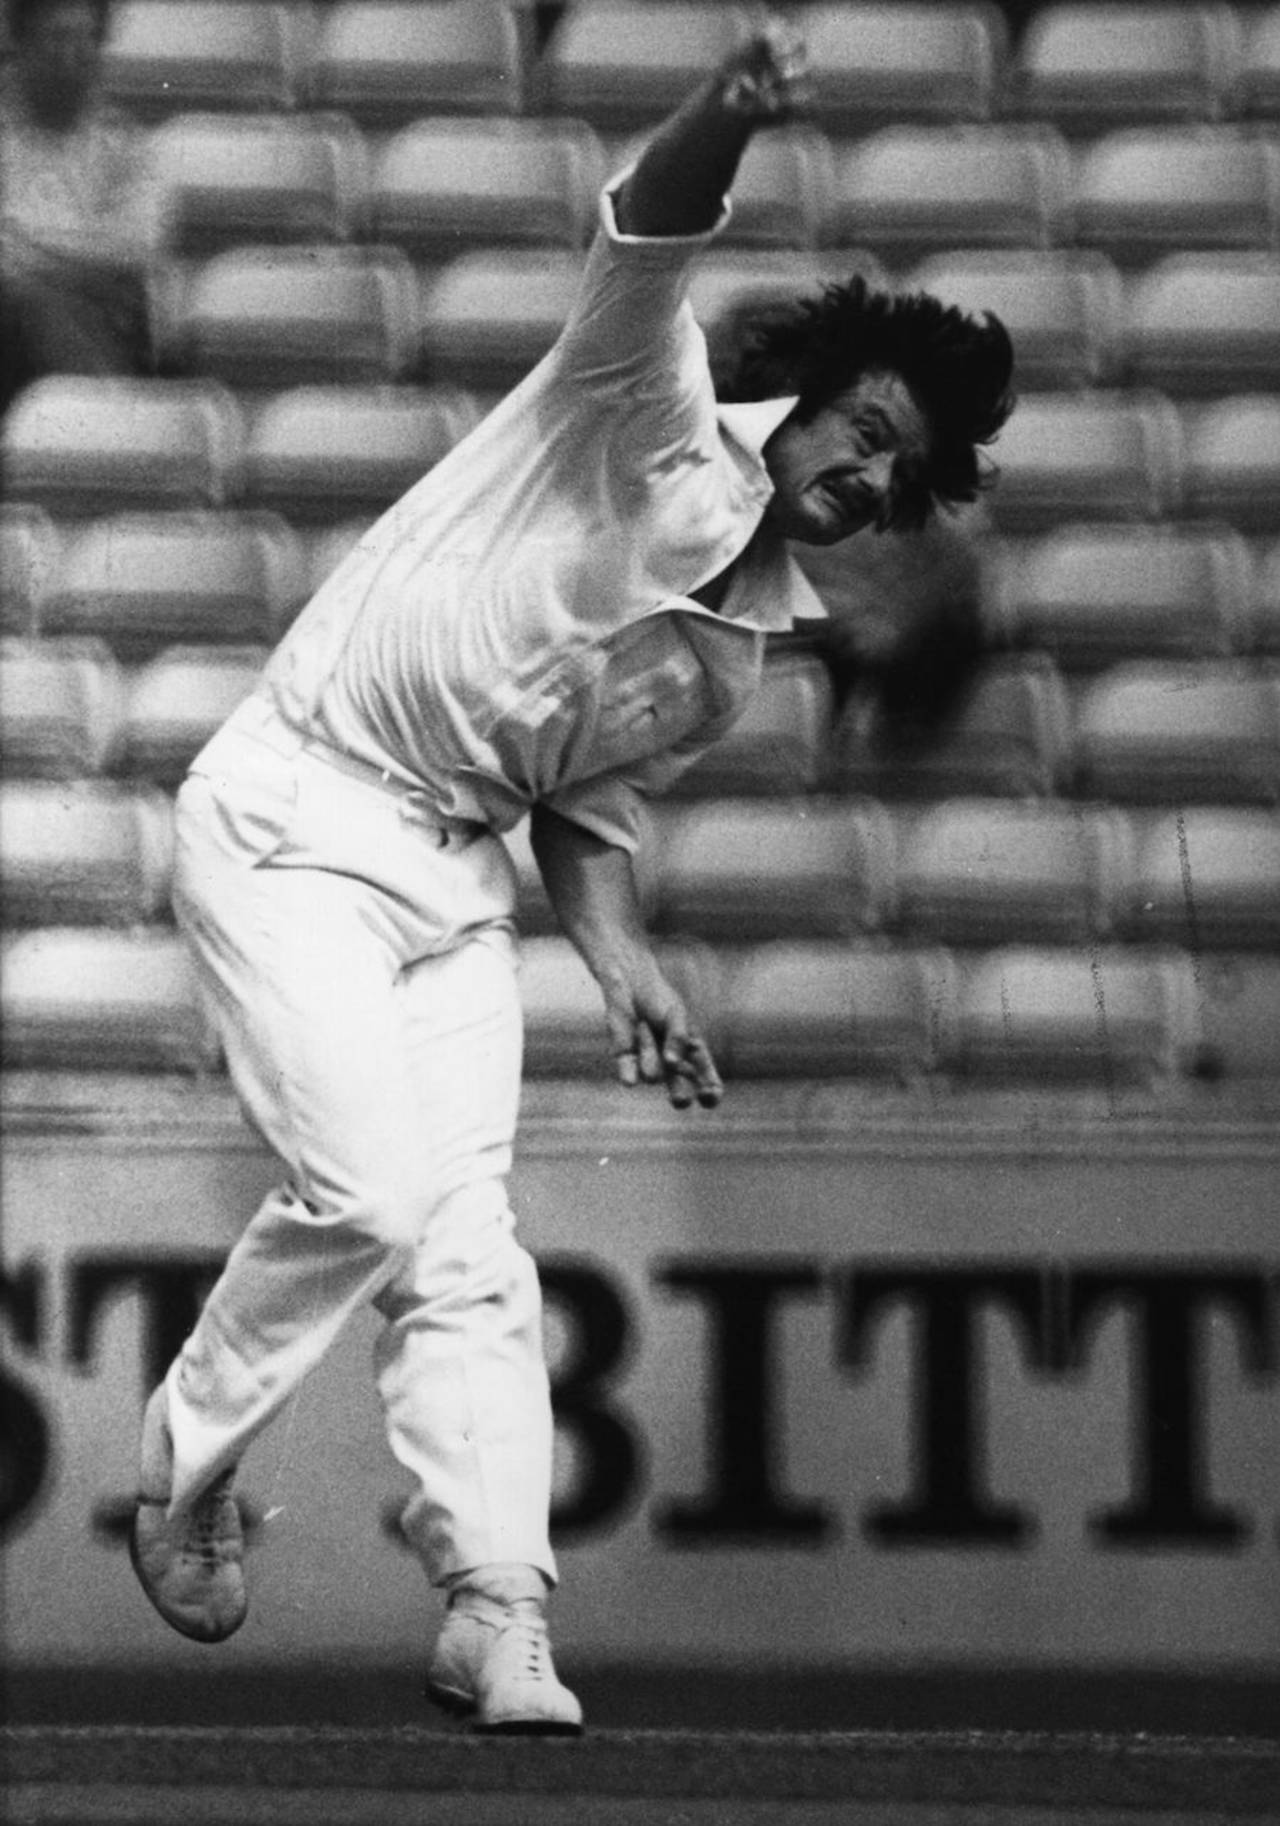 Robin Jackman bowls for Surrey, 28 August, 1980